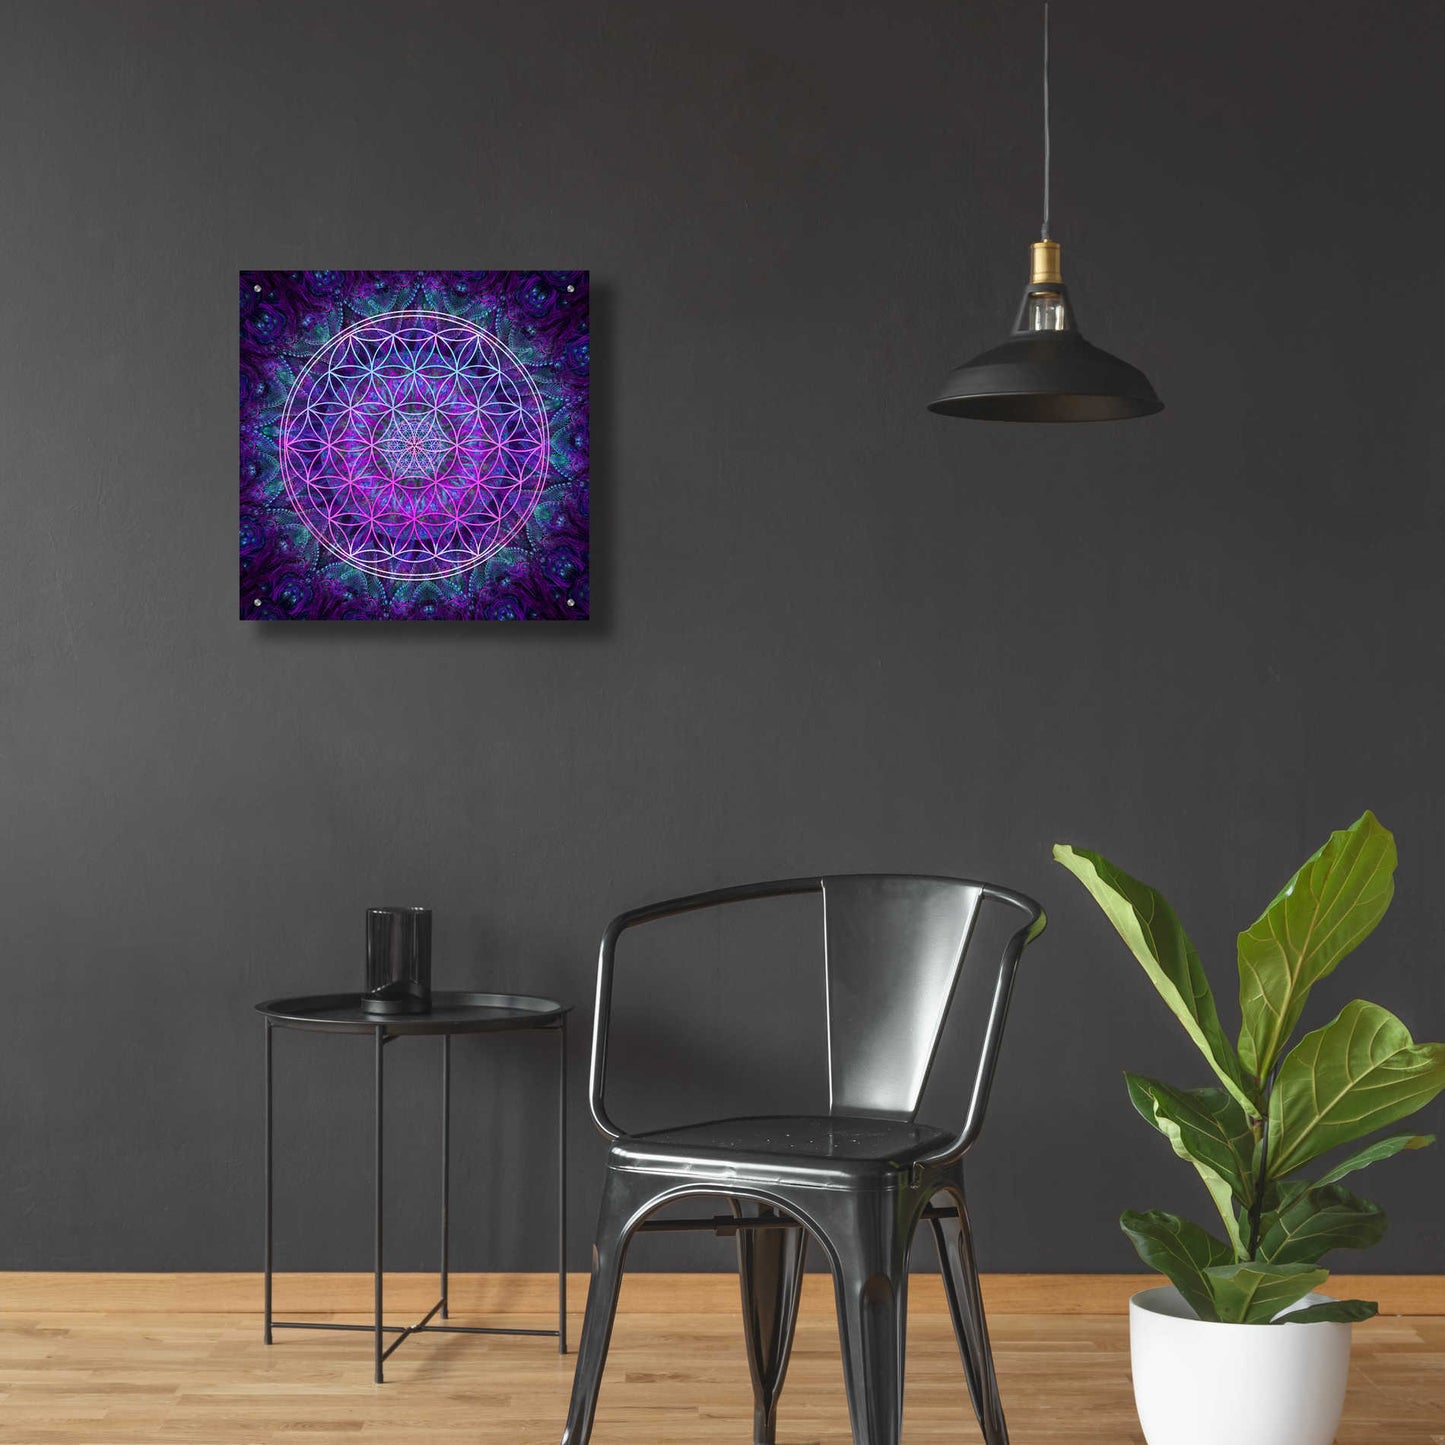 Epic Art 'Flower Of Life' by Cameron Gray Acrylic Glass Wall Art,24x24